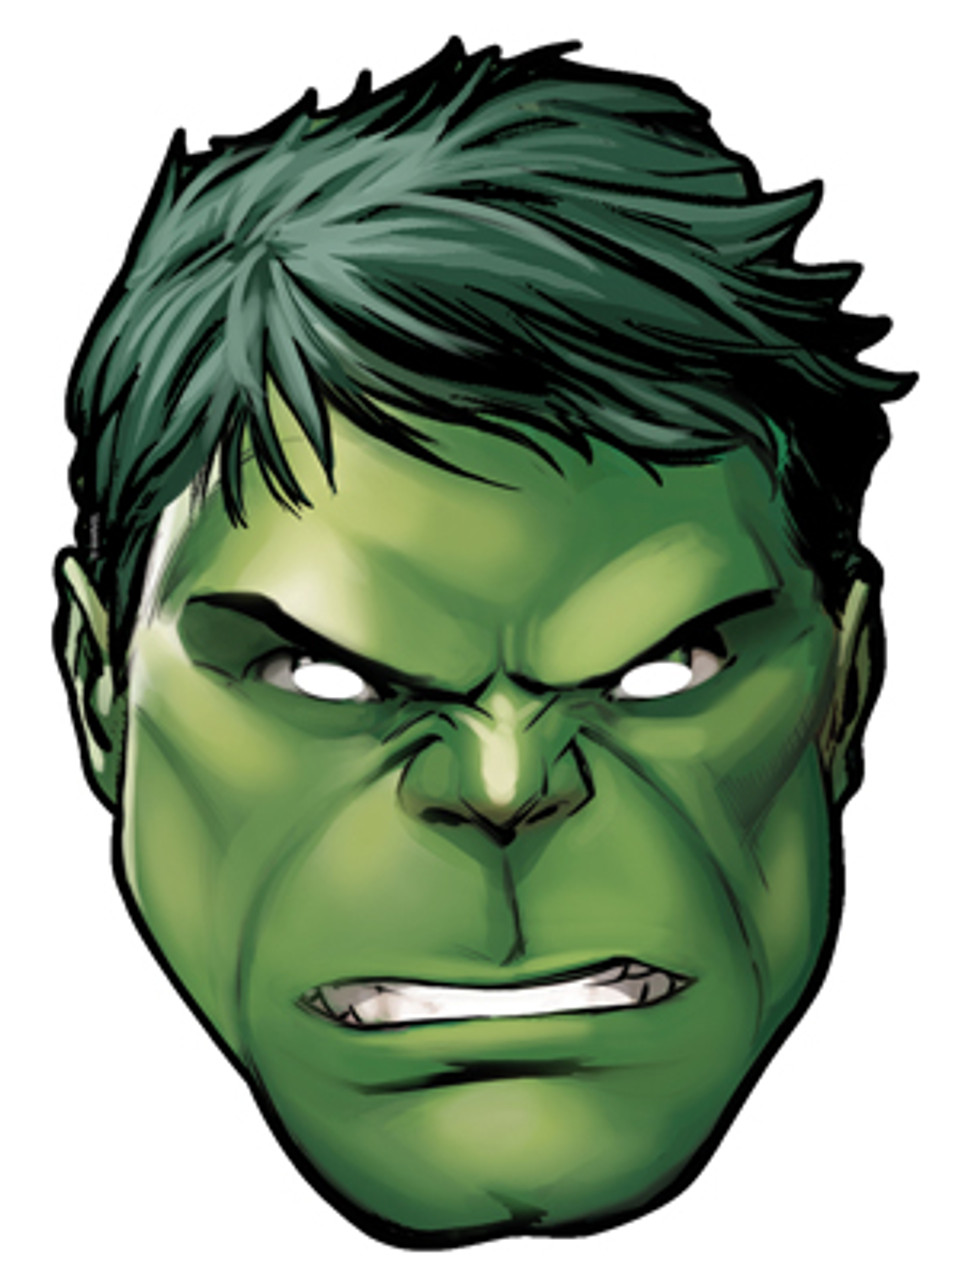 hulk-from-marvel-s-the-avengers-single-card-party-face-mask-available